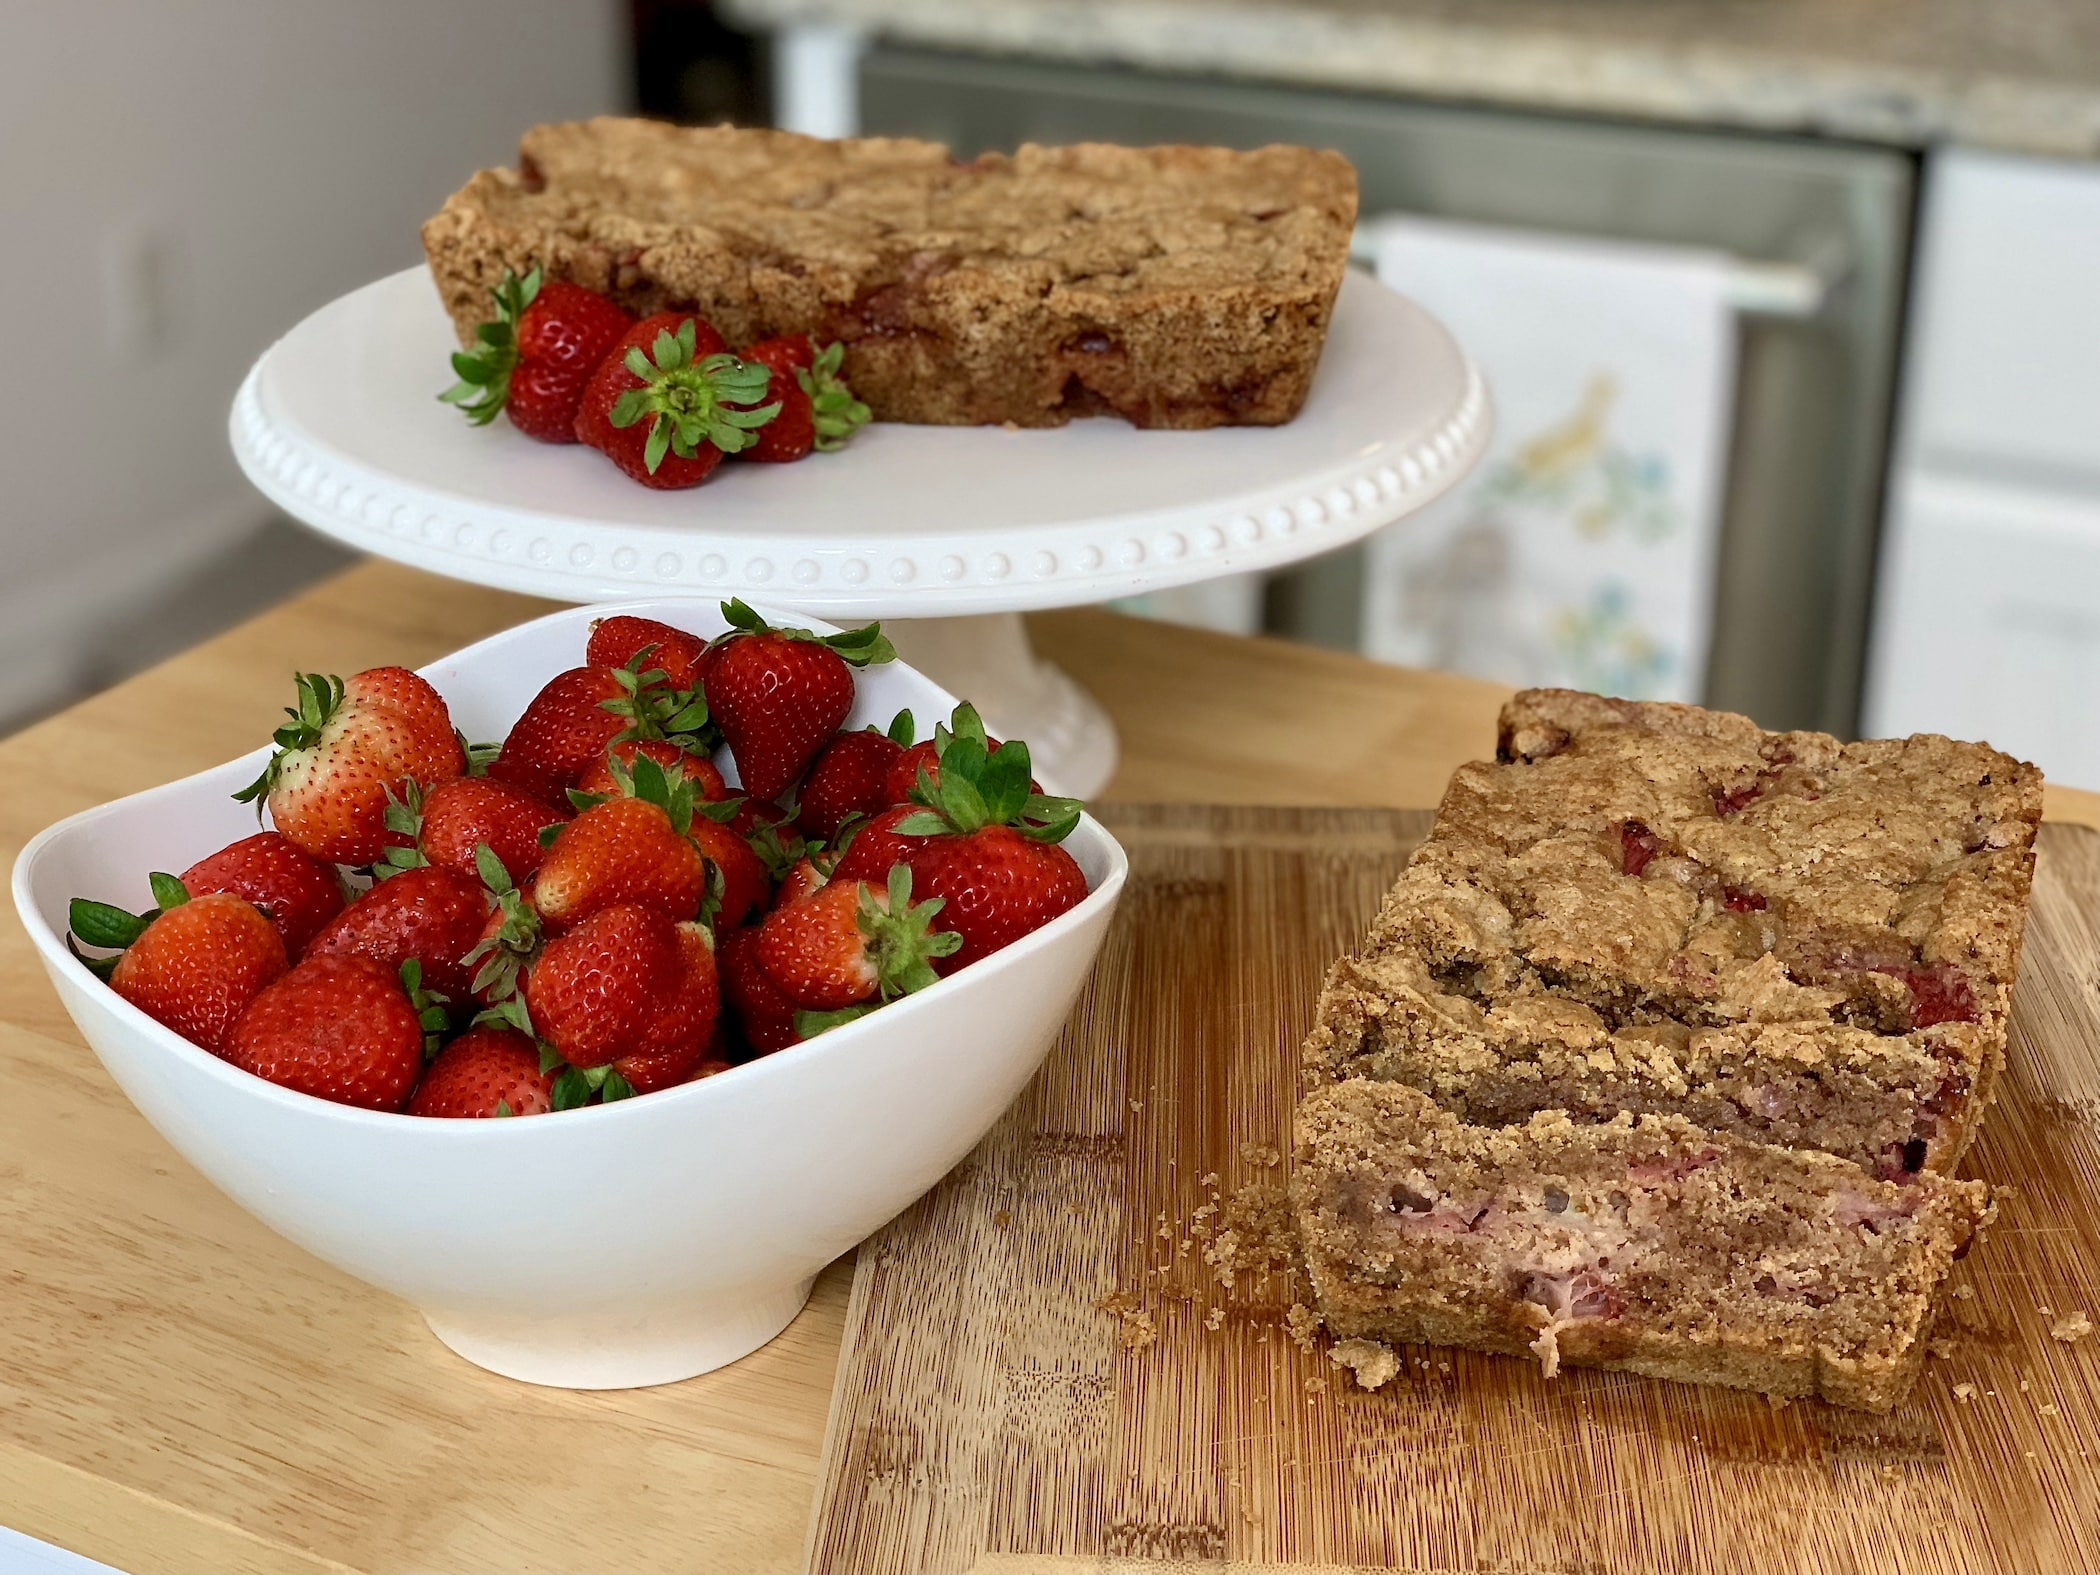 Quick bread loaded with strawberries and pecans.